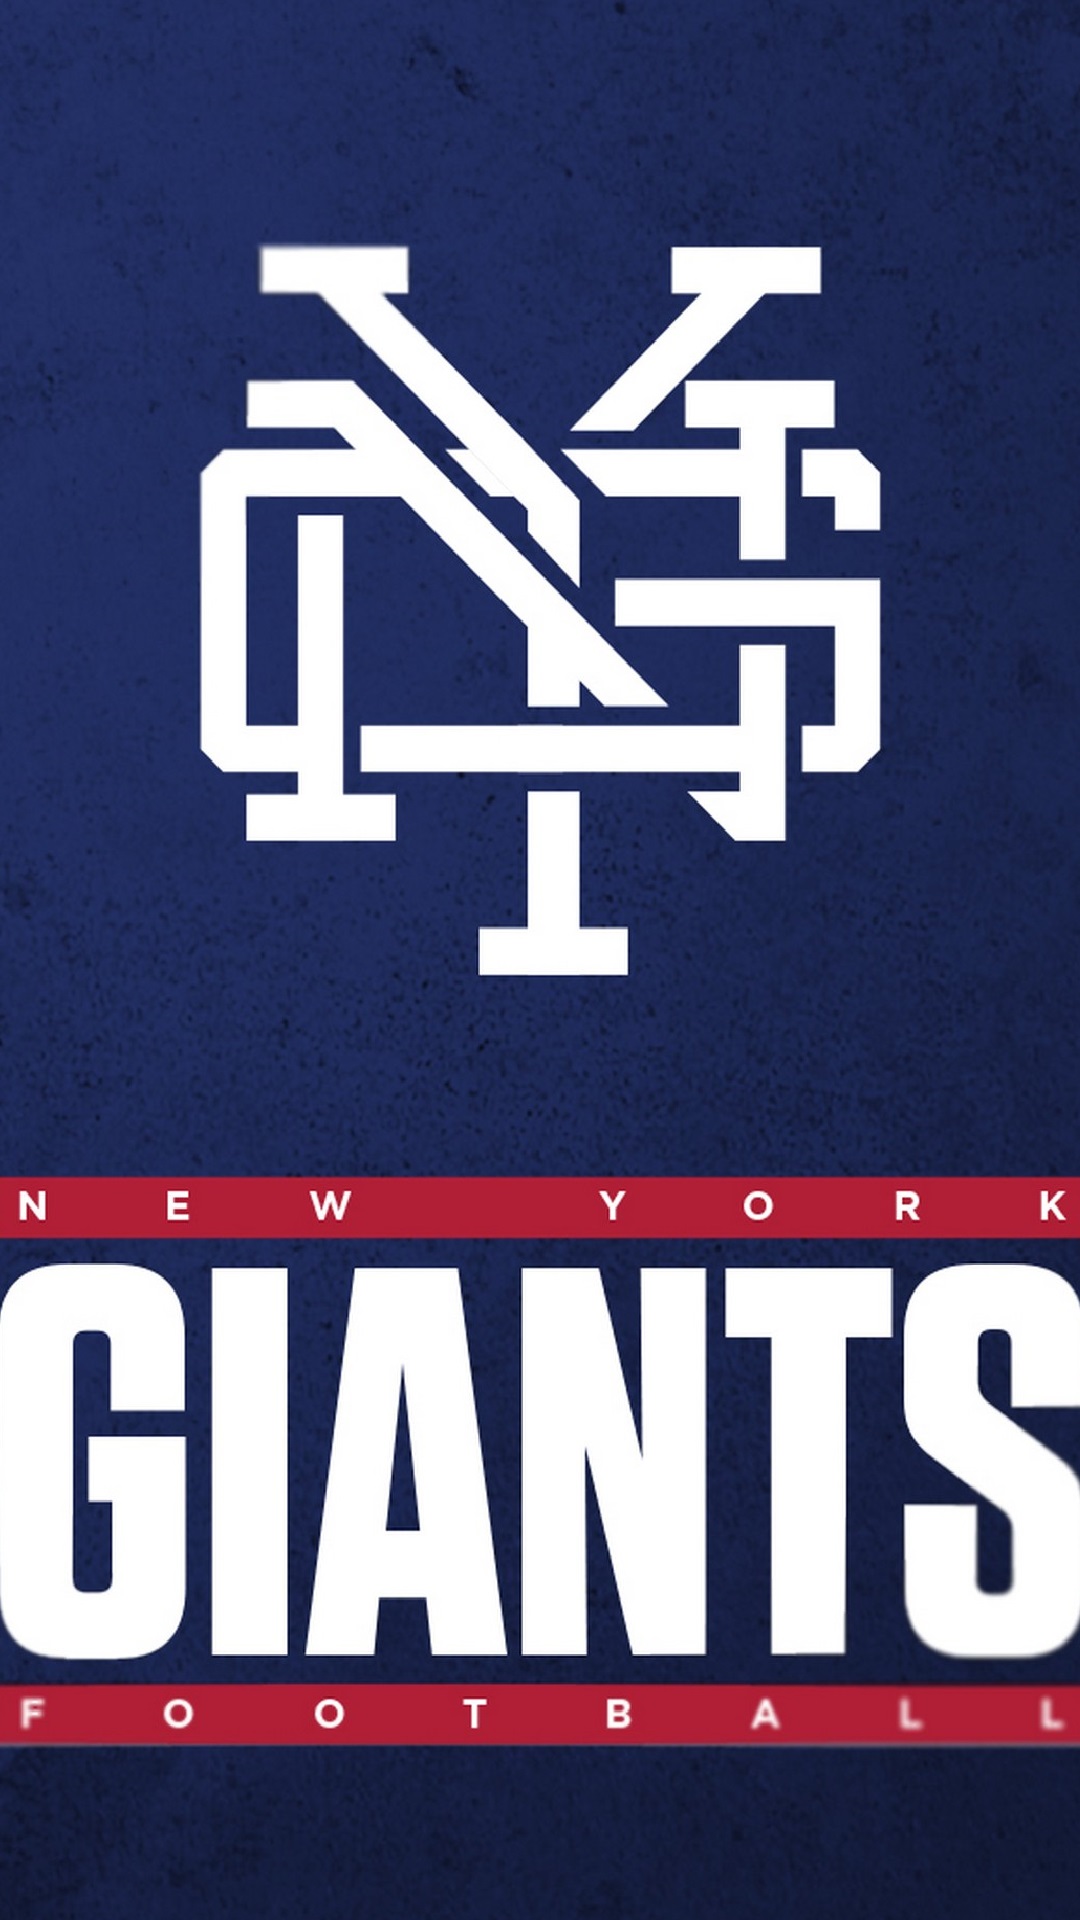 New York Giants iPhone 8 Wallpaper With high-resolution 1080X1920 pixel. Download and set as wallpaper for Desktop Computer, Apple iPhone X, XS Max, XR, 8, 7, 6, SE, iPad, Android